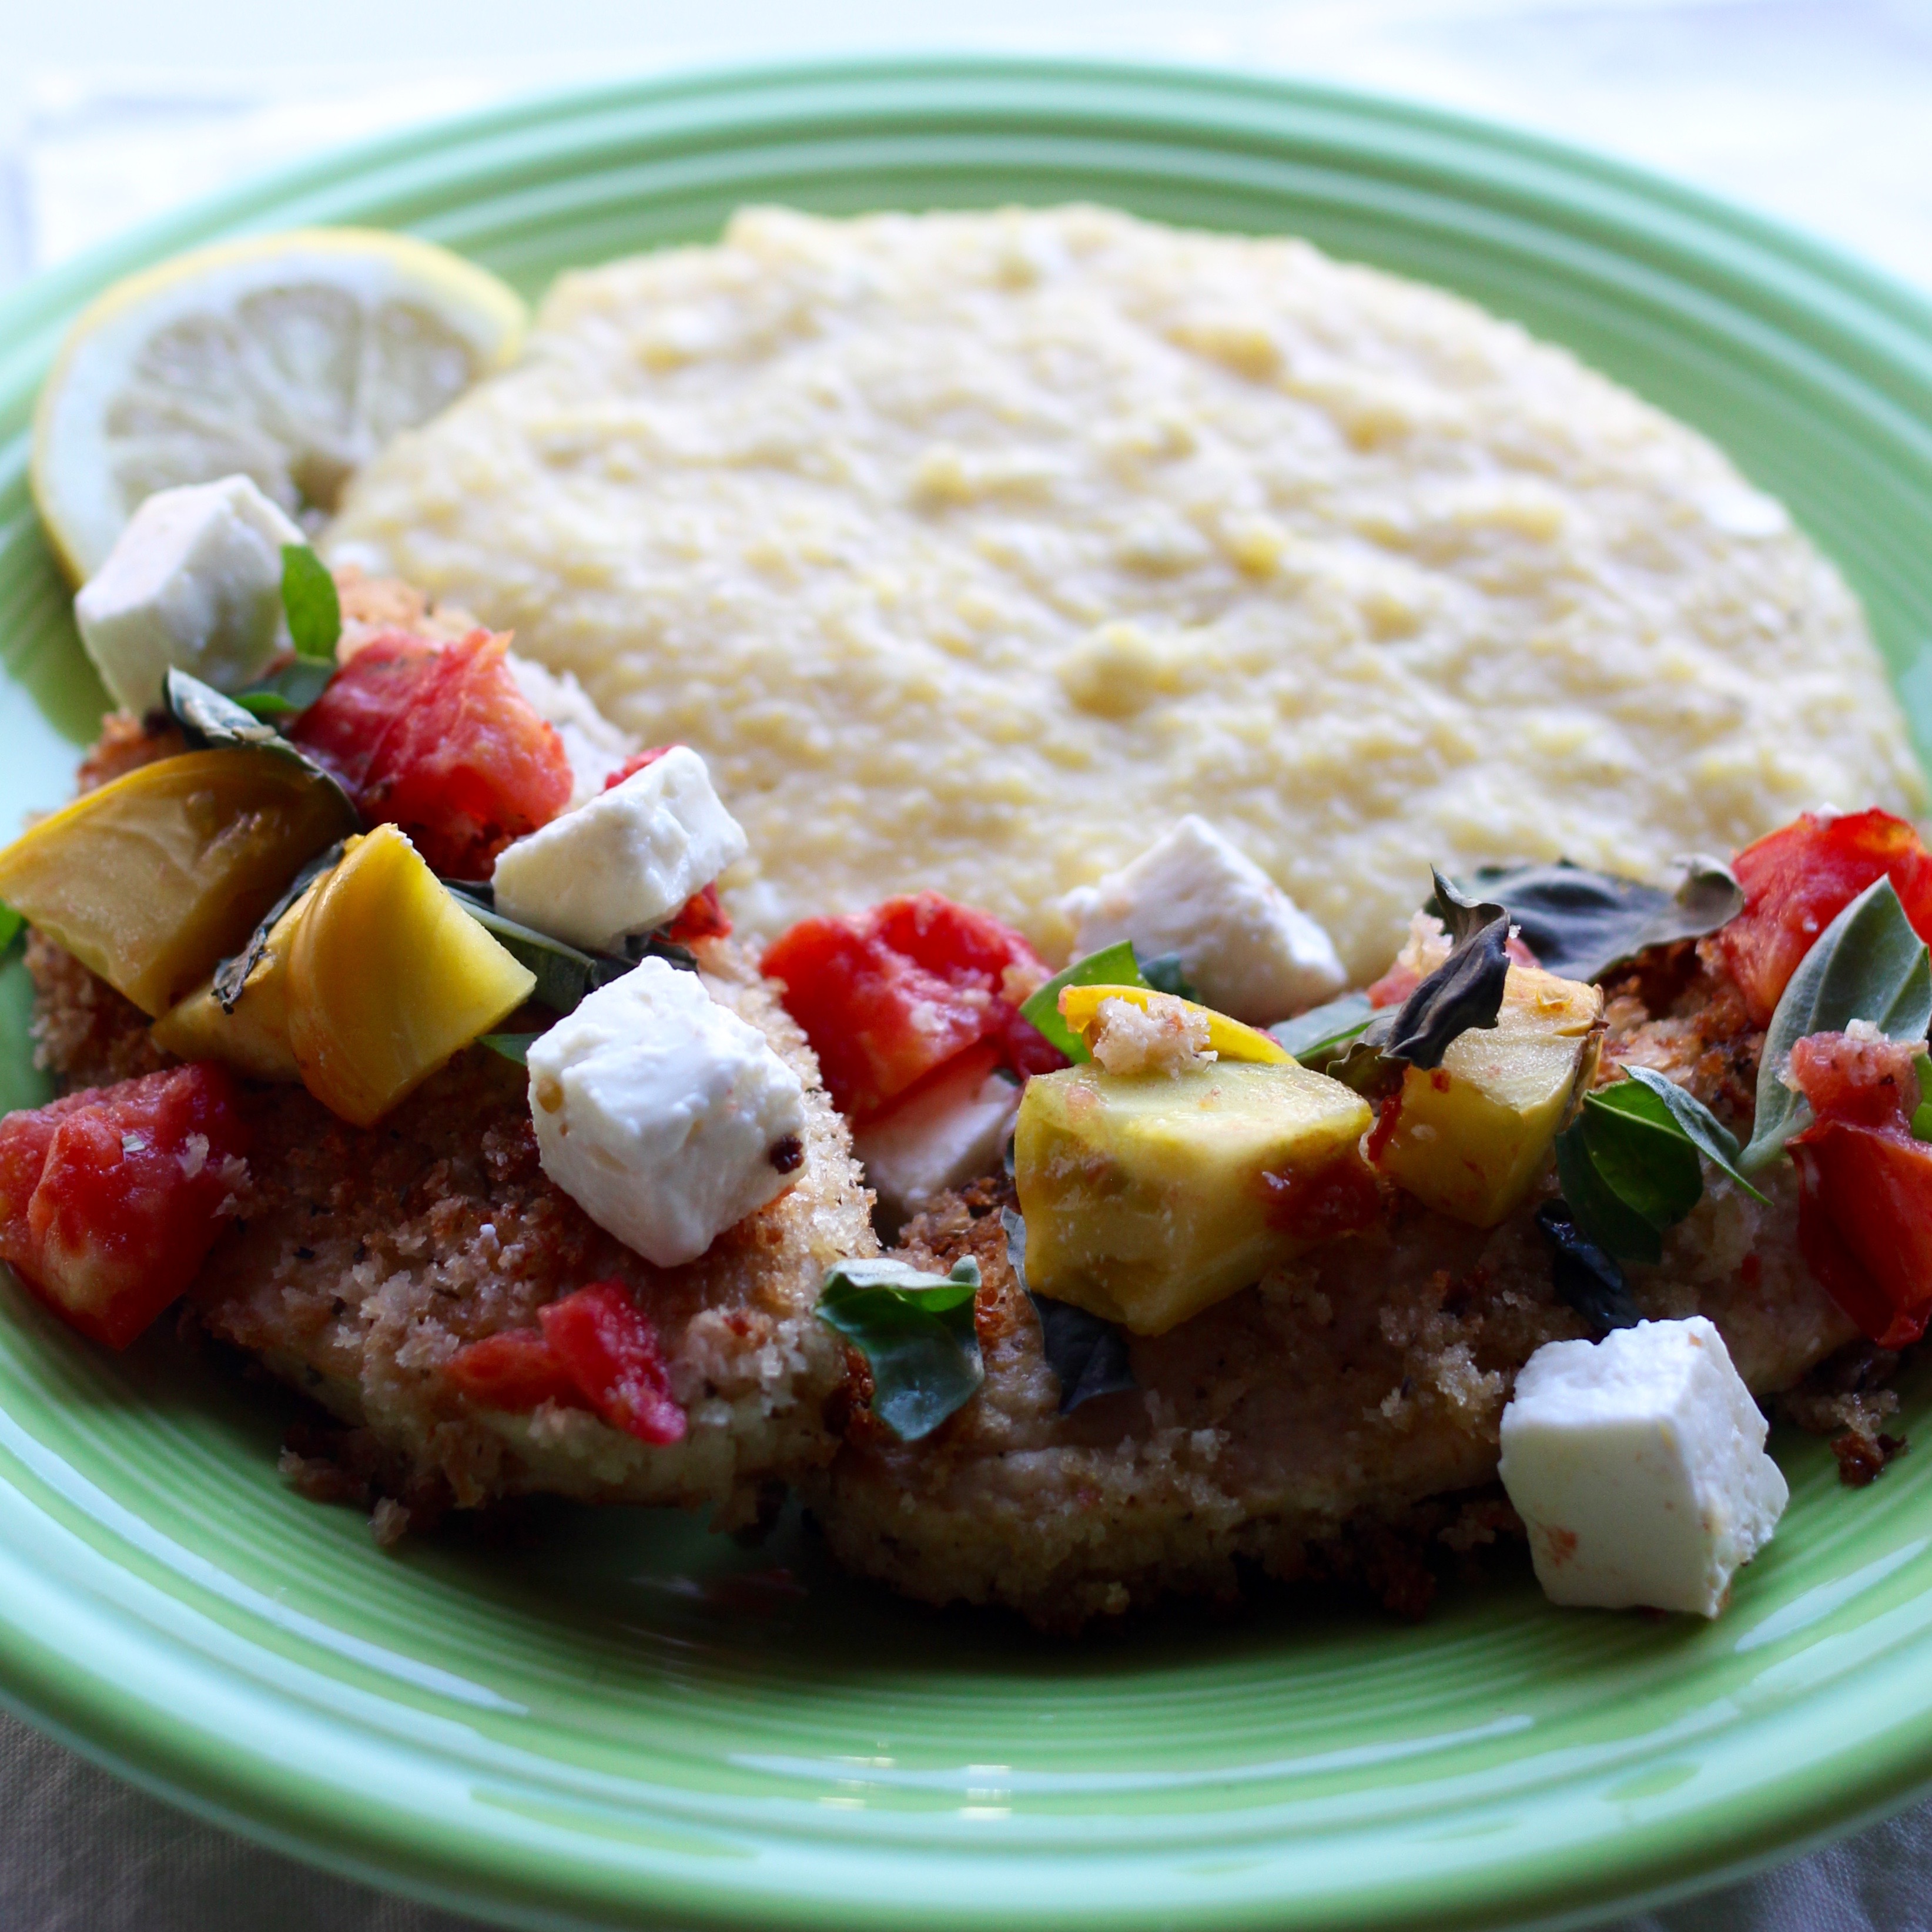 Forbidden Rice Blog: Breaded Chik'n Cutlets with Heirloom Tomatoes and Feta | Quorn